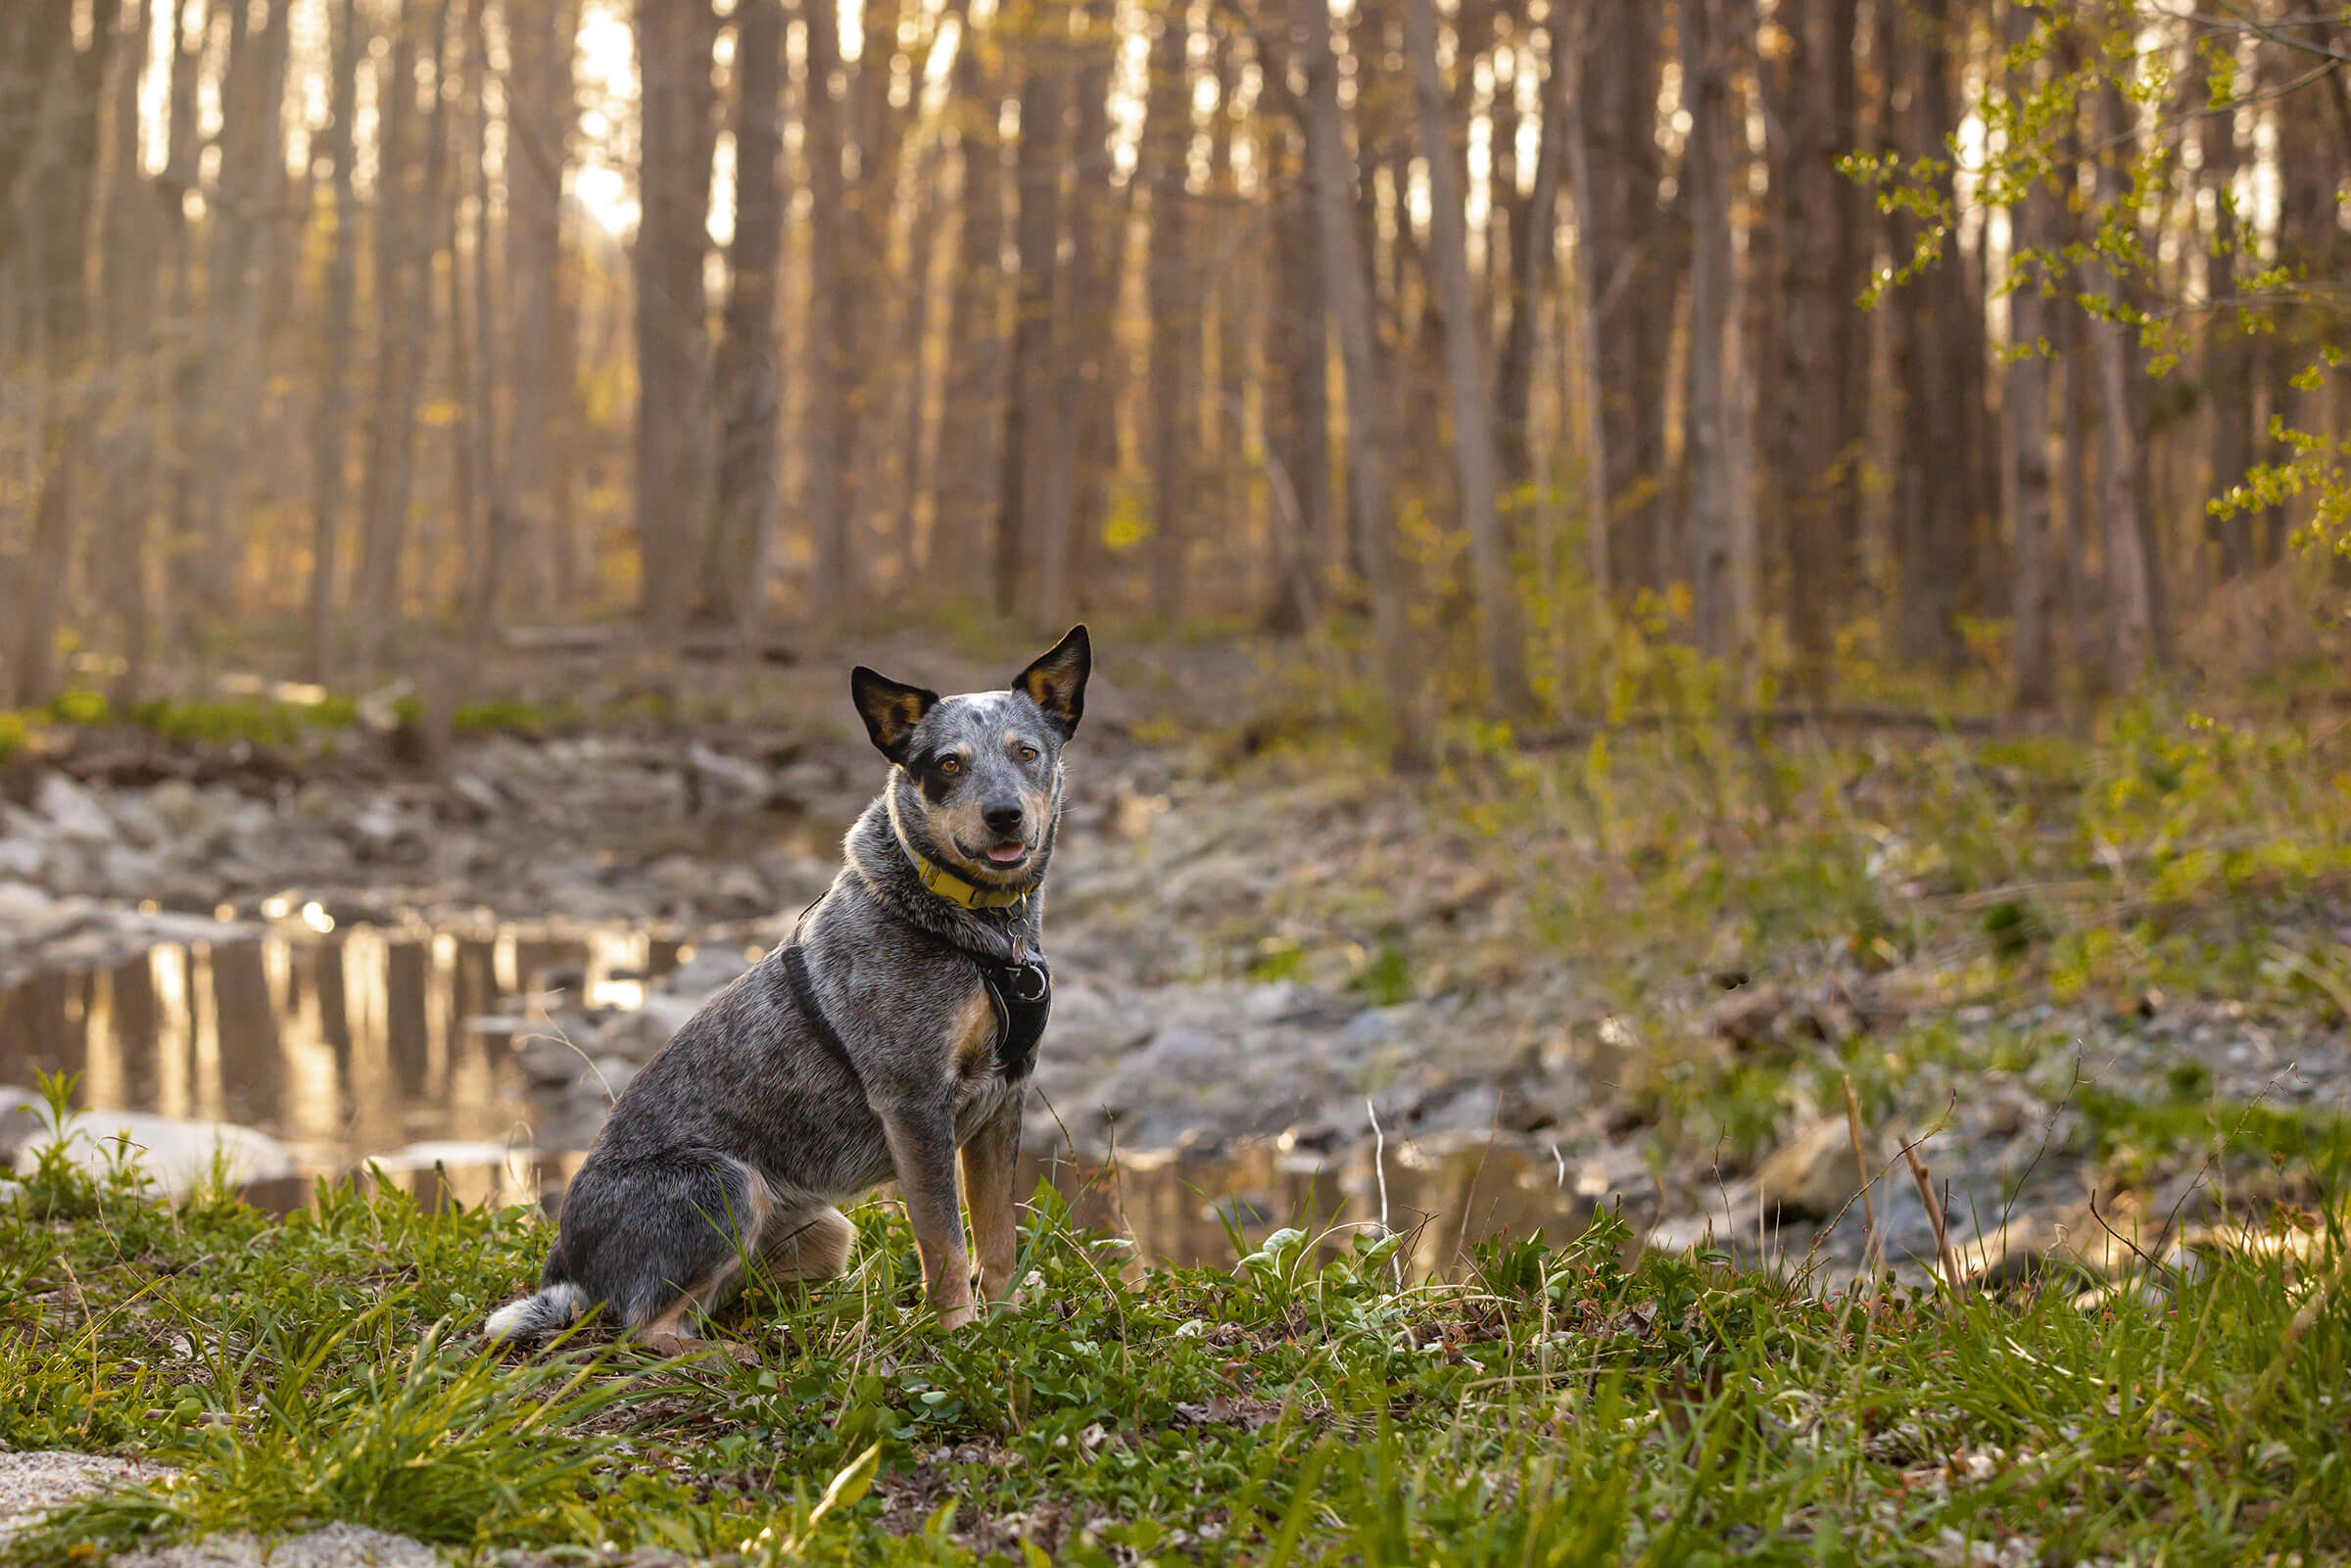 Cattle dog posing in forest, Toronto